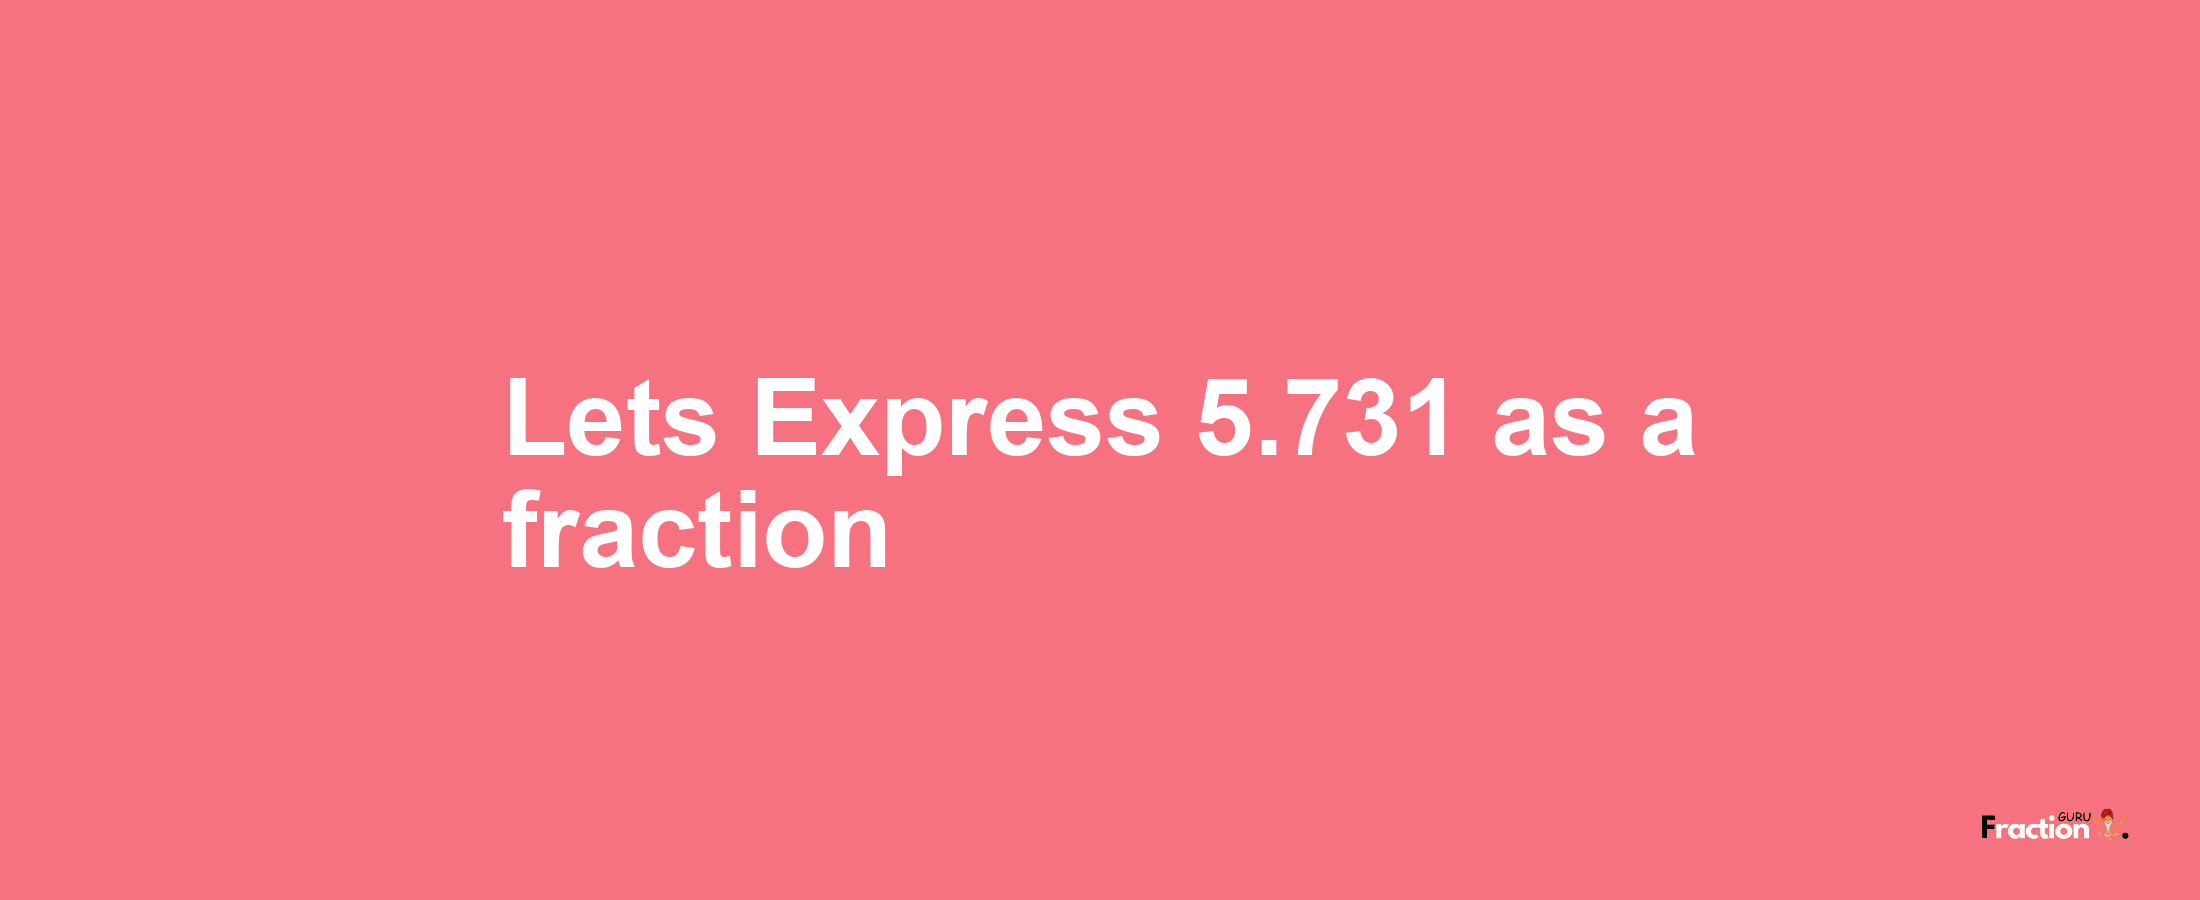 Lets Express 5.731 as afraction